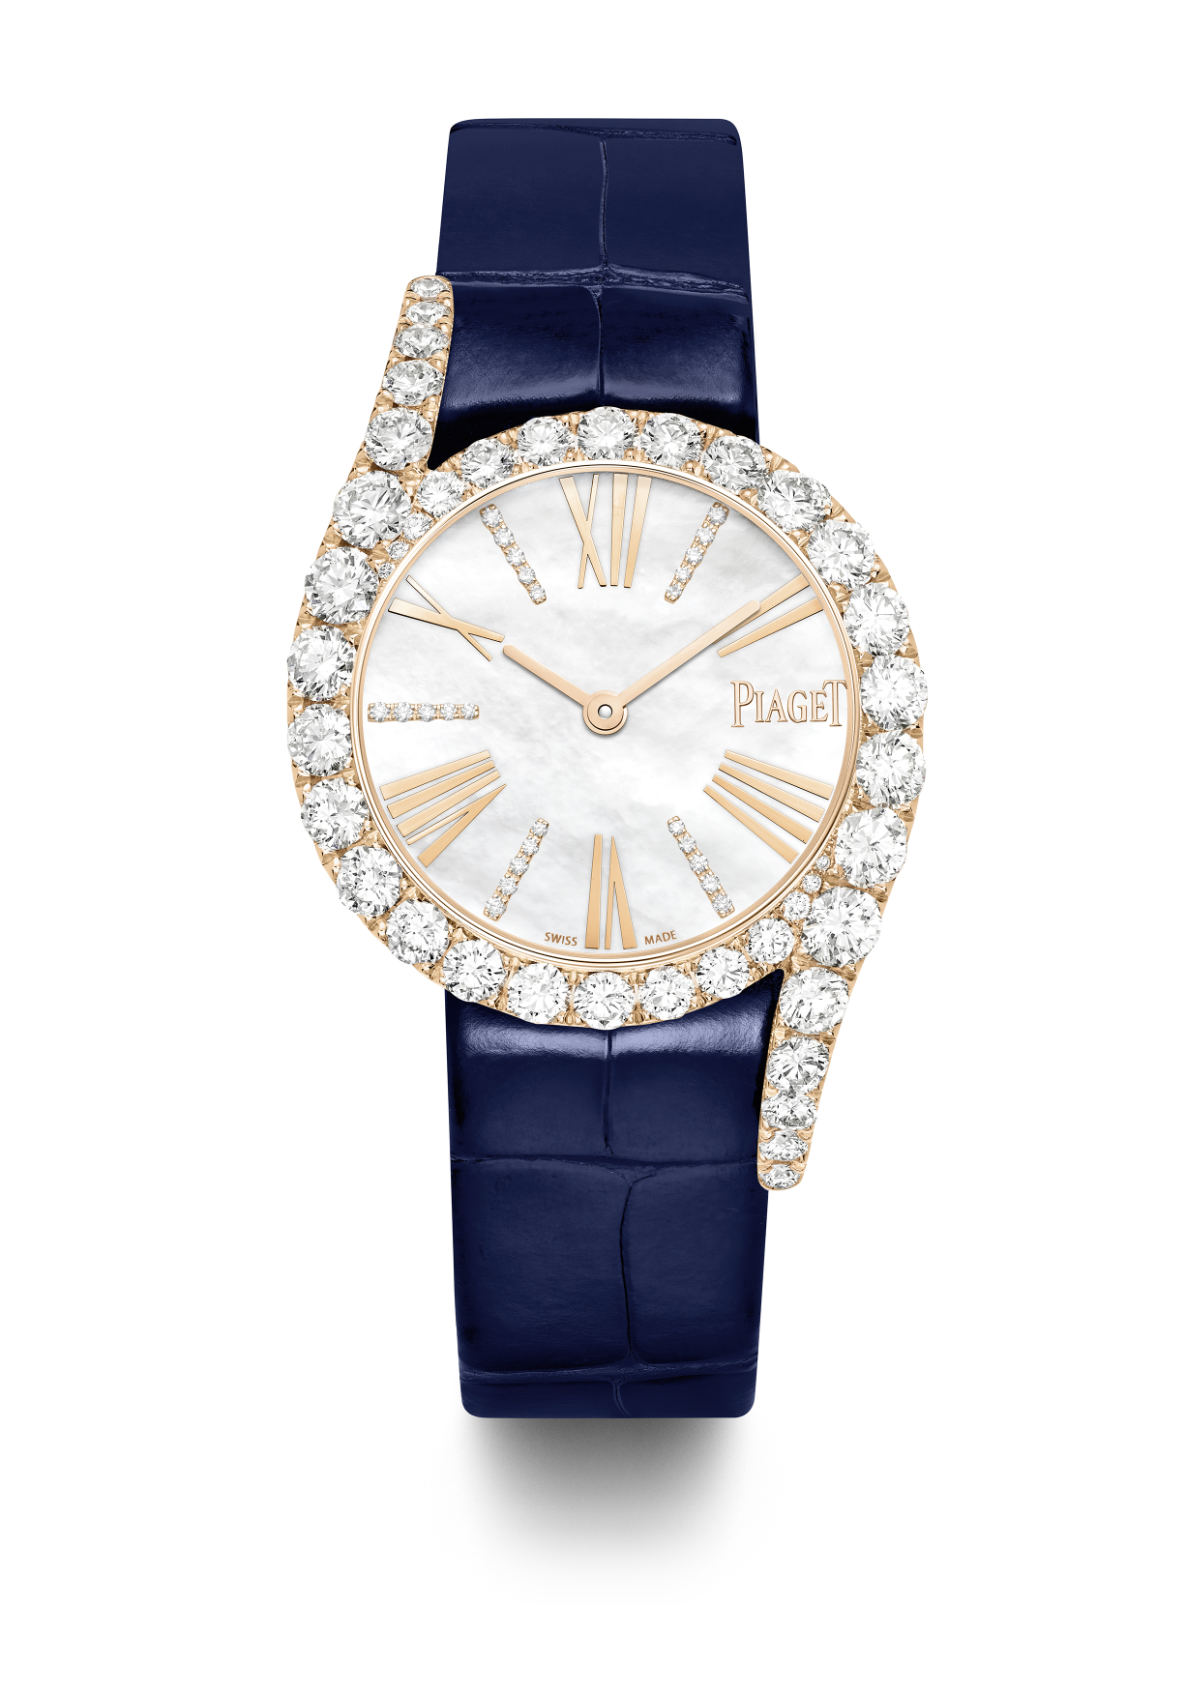 Piaget: Experience Infinite Radiance